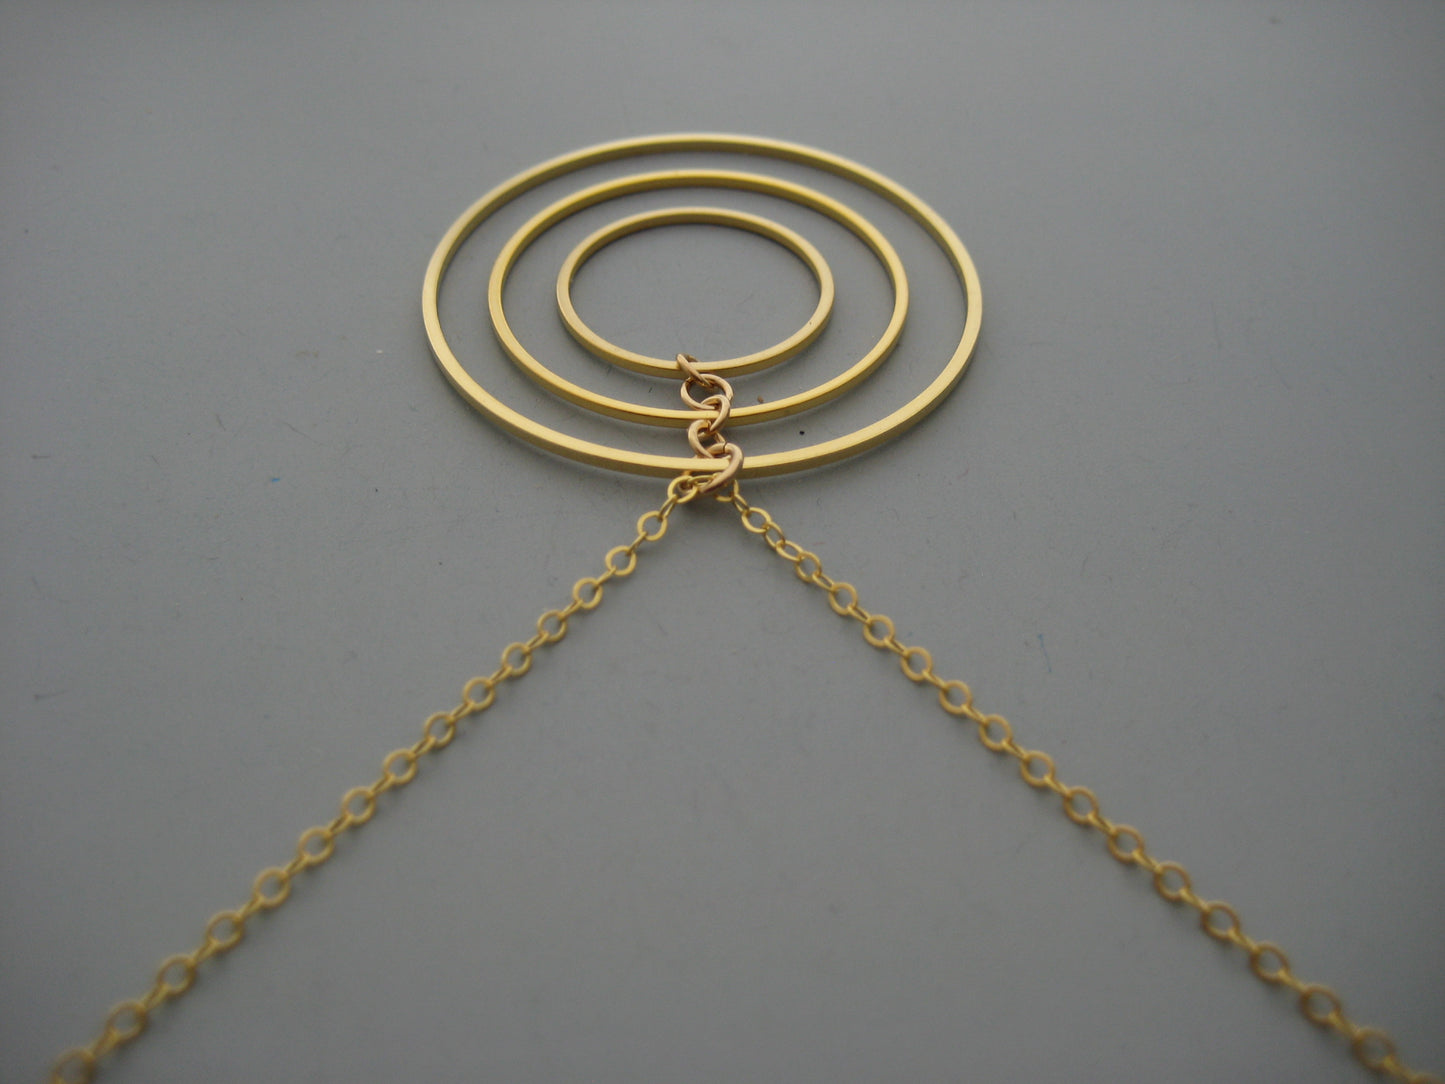 Concentric Circle Hoop Necklace